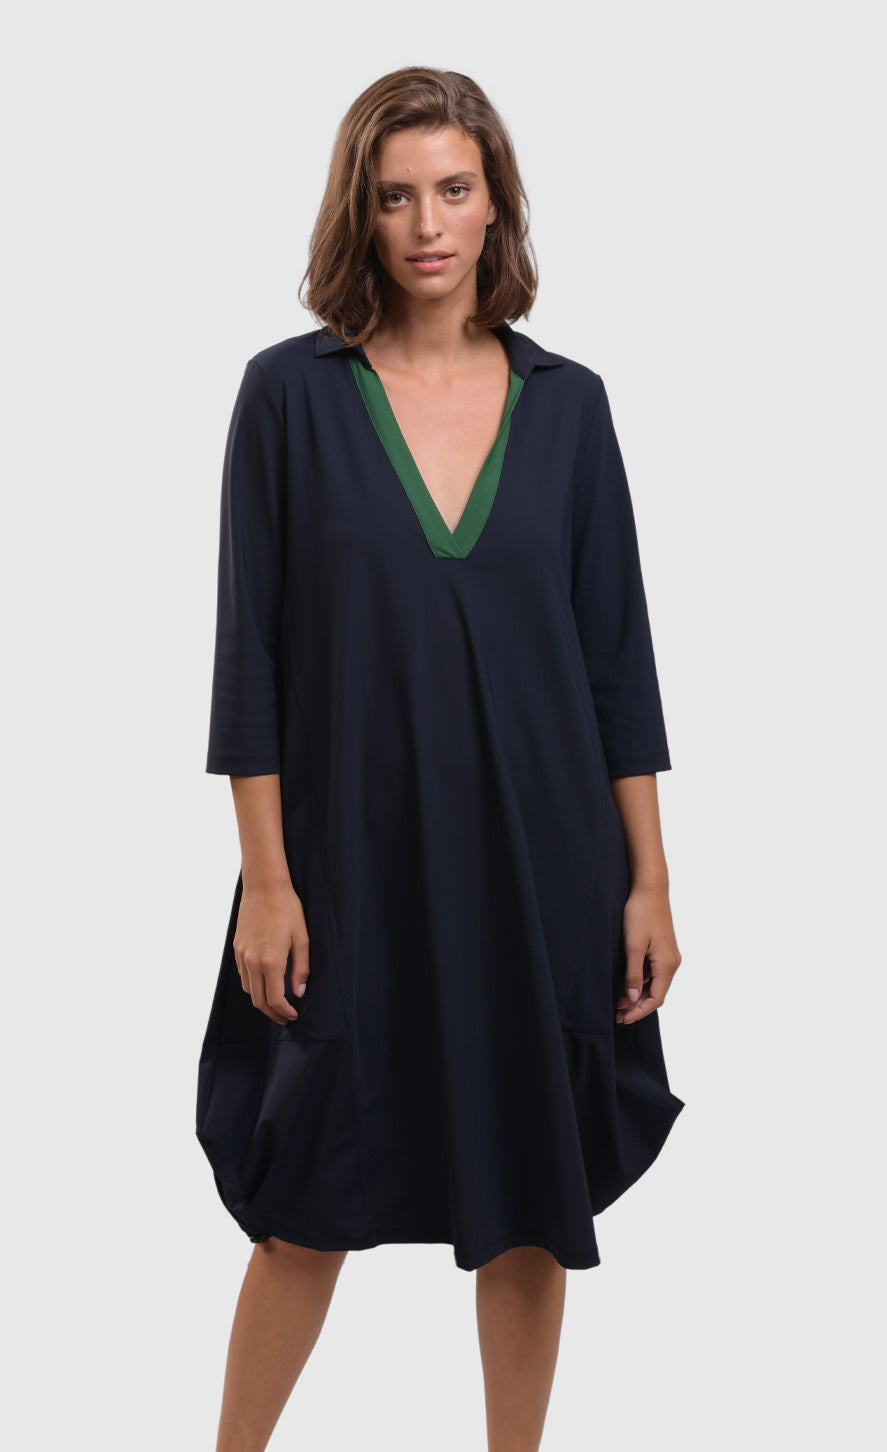 Front top half view of a woman wearing the alembika tekbika navy Dress. This dress sits at the knees and has a green v-neck with a collar. The dress has a bubble skirt and 3/4 length sleeves.